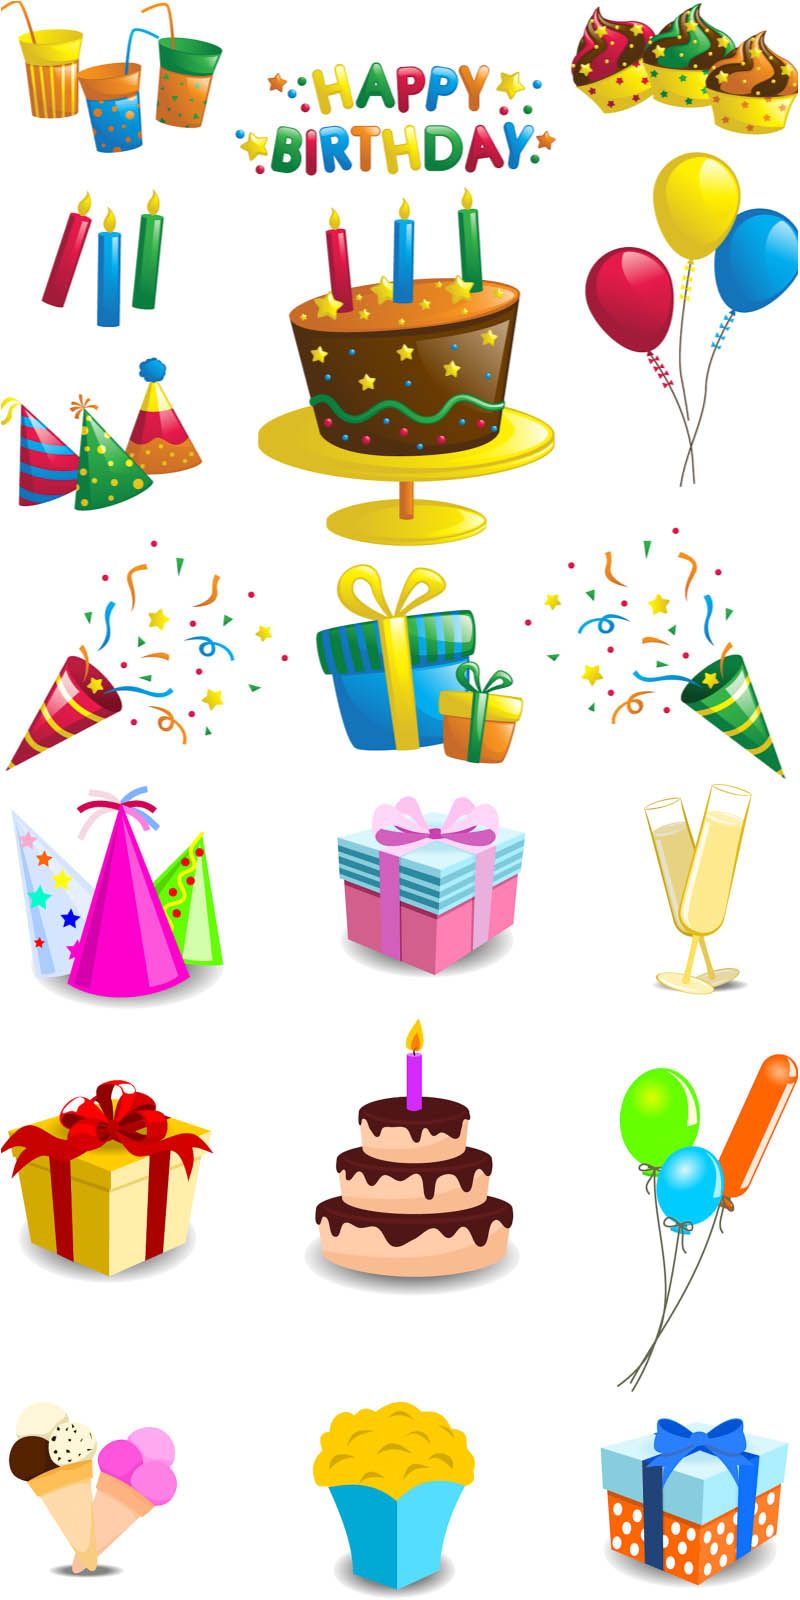 Download Birthday Icon Vector at Vectorified.com | Collection of Birthday Icon Vector free for personal use